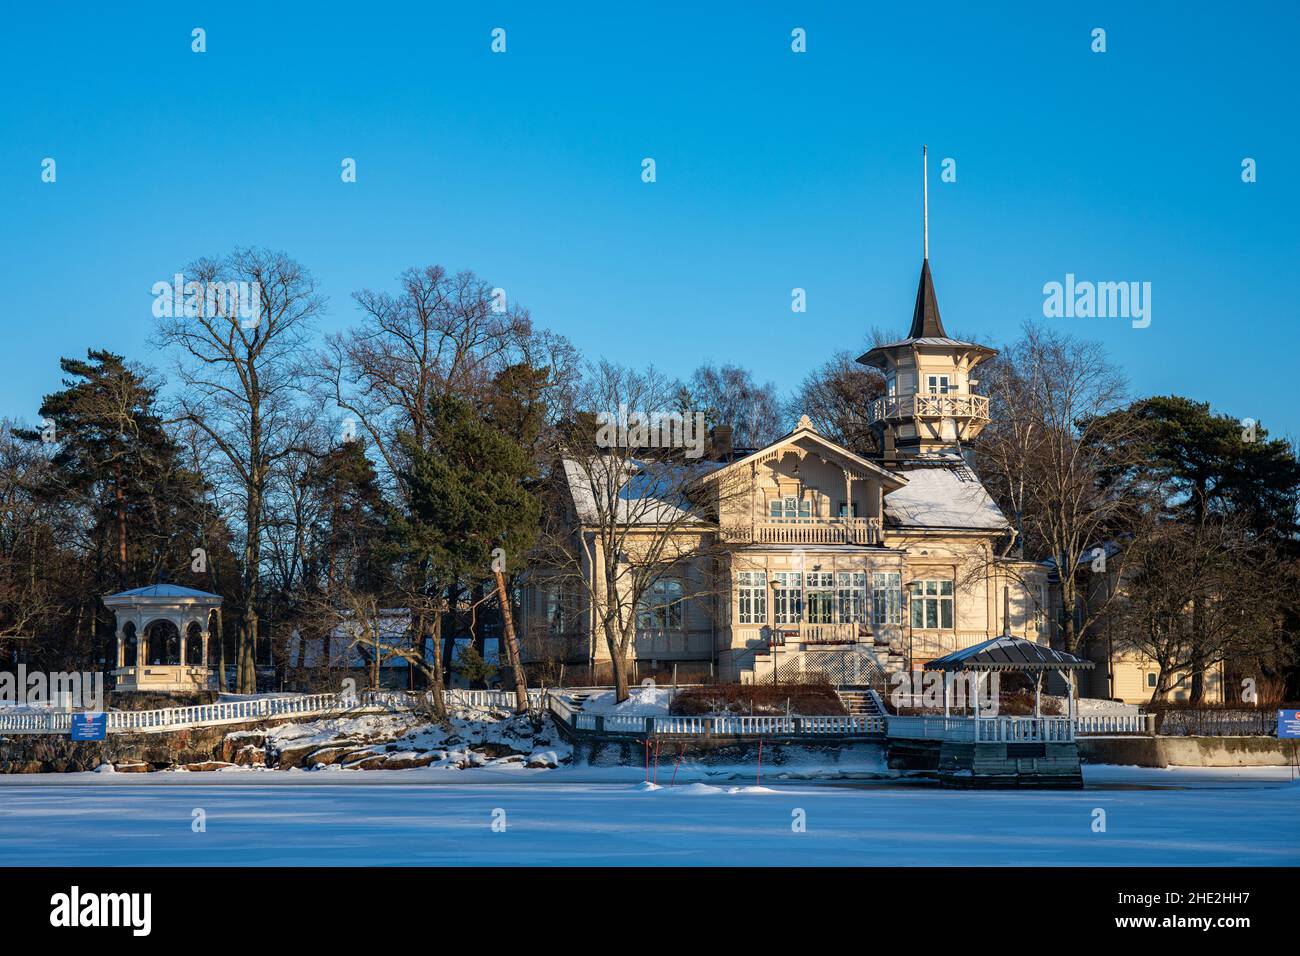 Villa Kesäranta, the official residence of Prime  Minister, on a clear winter day in Meilahti district of Helsinki, Finland Stock Photo